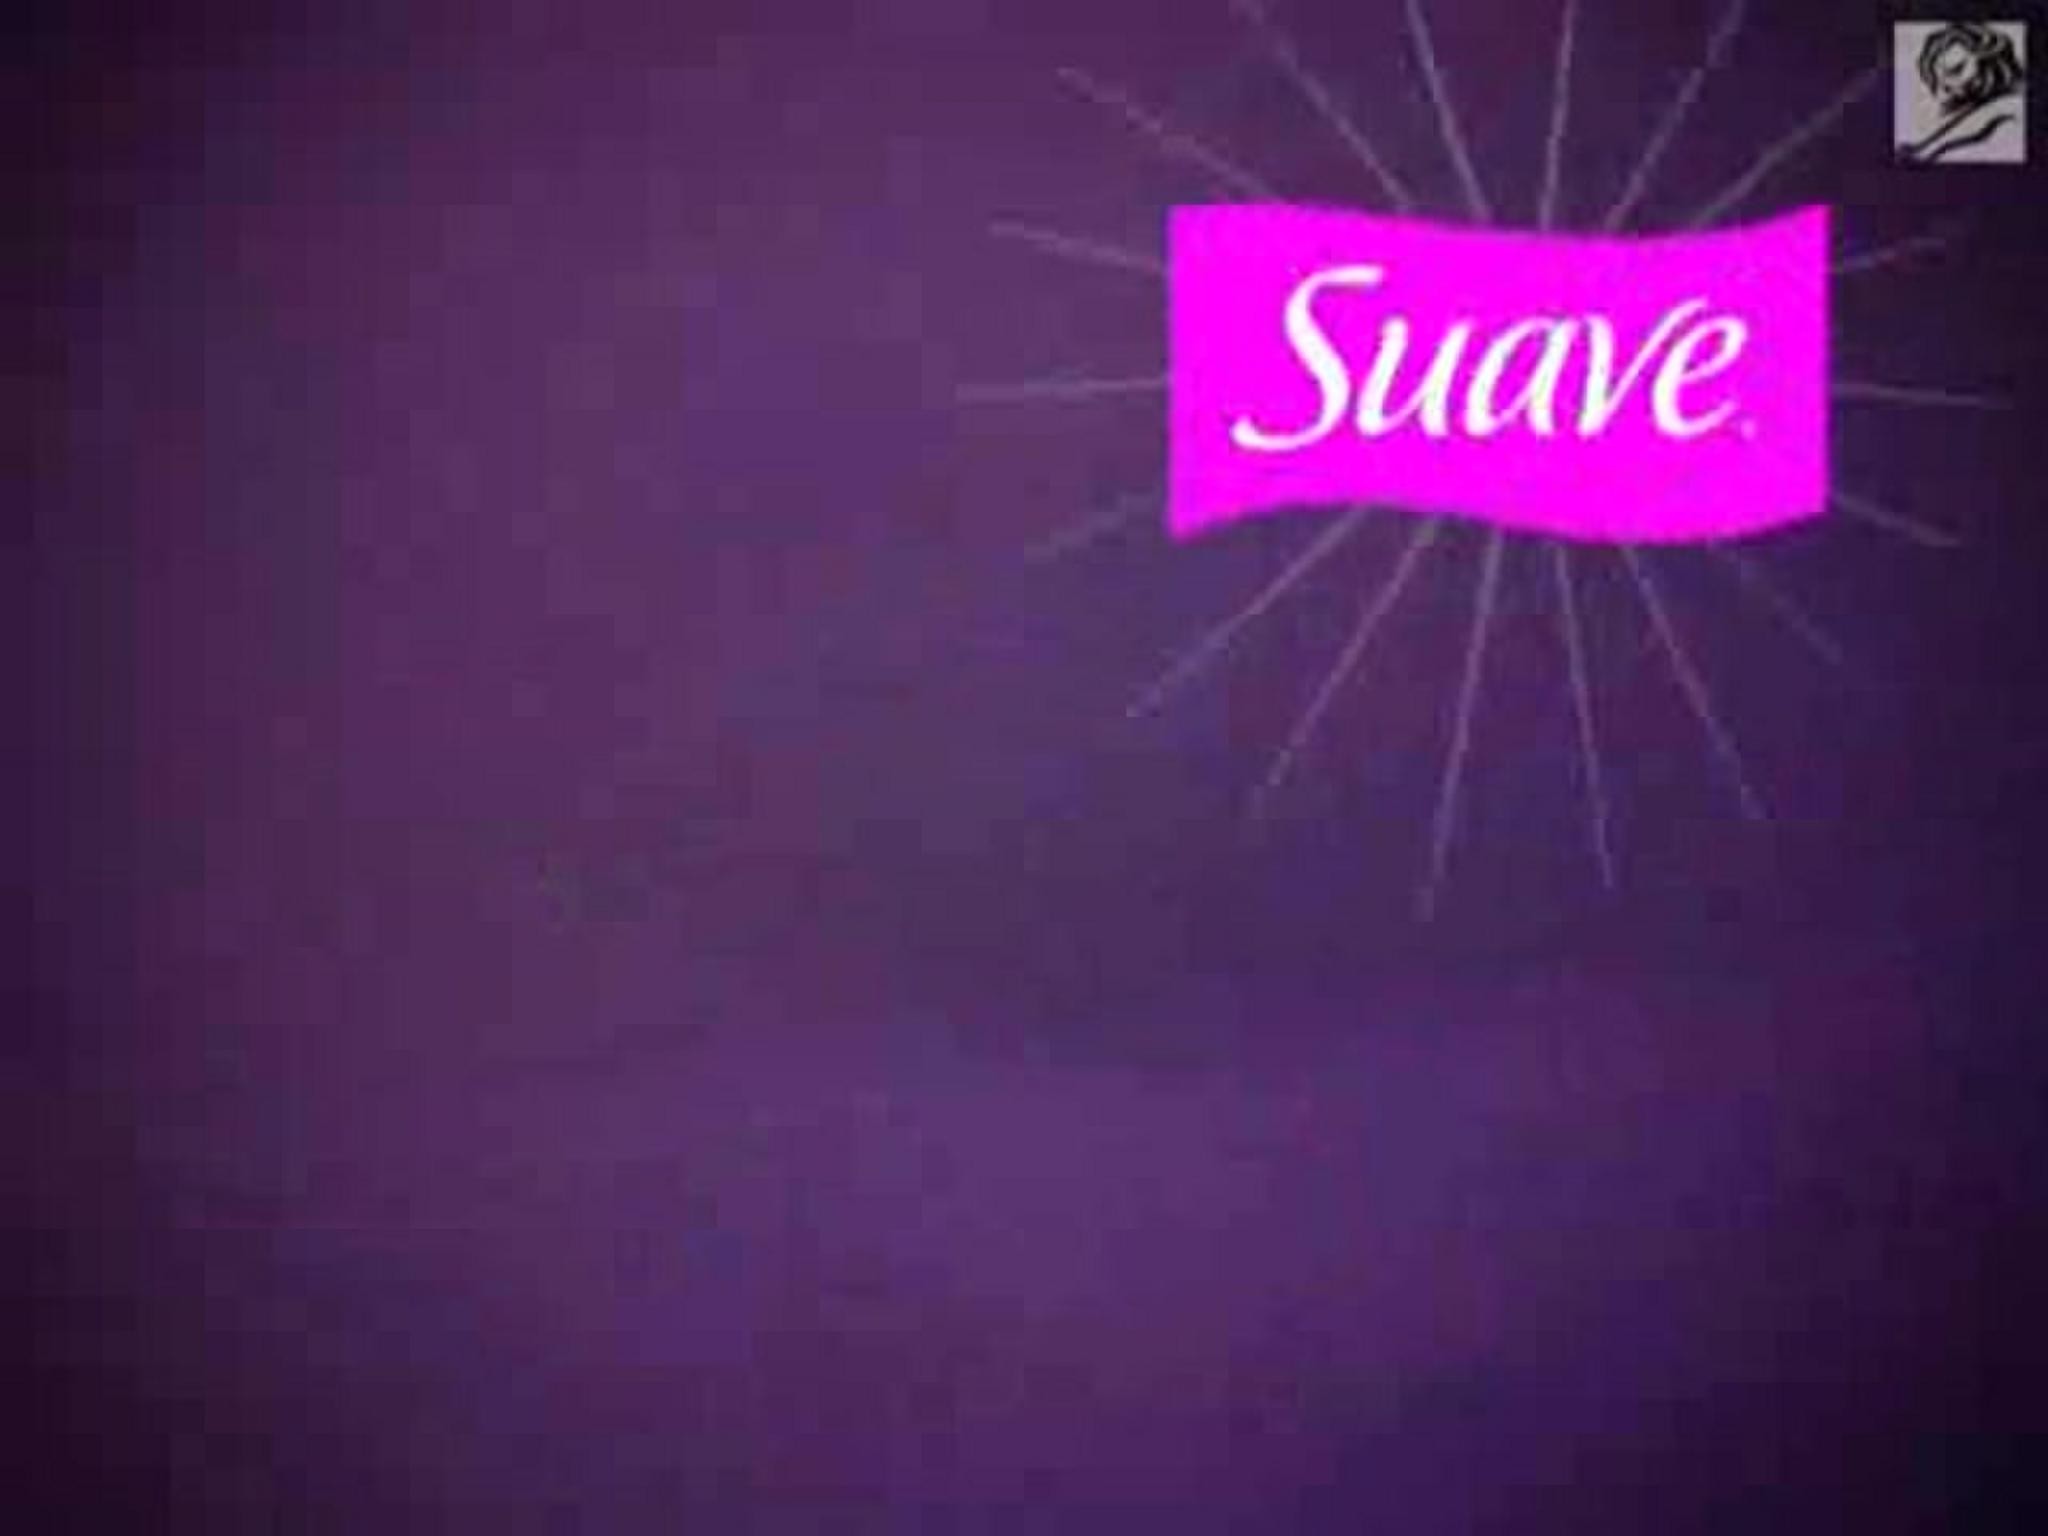 SUAVE AND CELLULAR PHONES